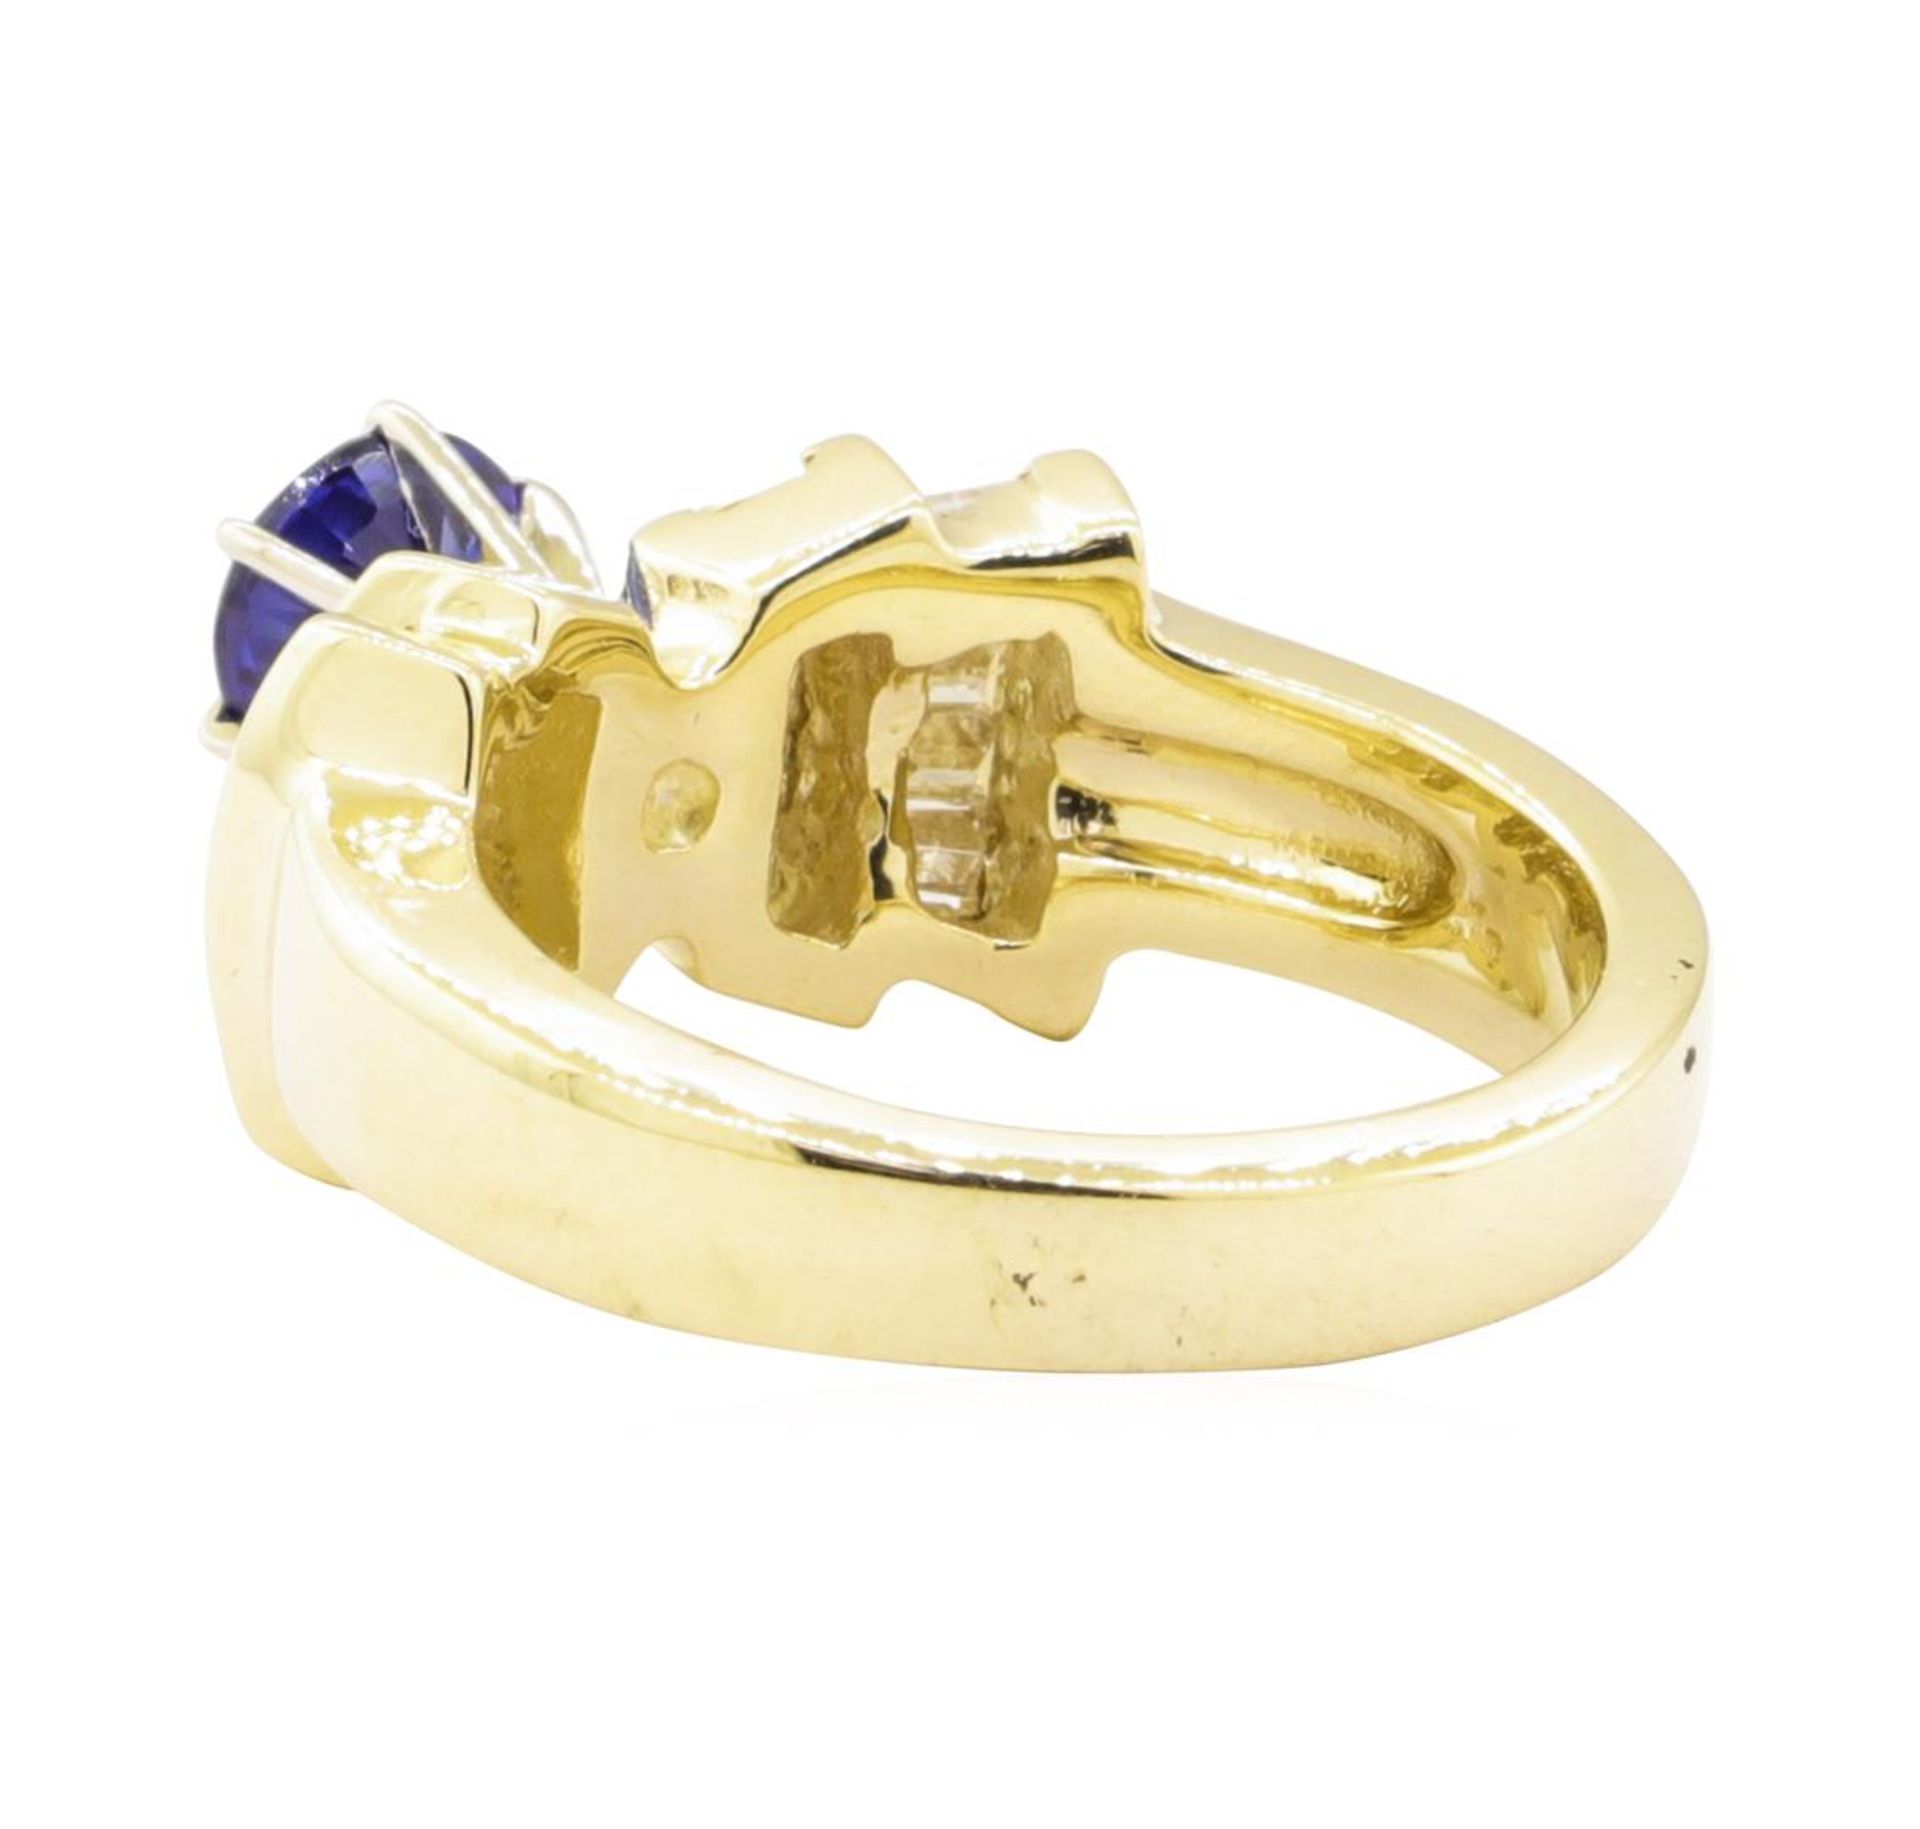 1.66 ctw Blue Sapphire And Diamond Ring - 14KT Yellow Gold - Image 3 of 5